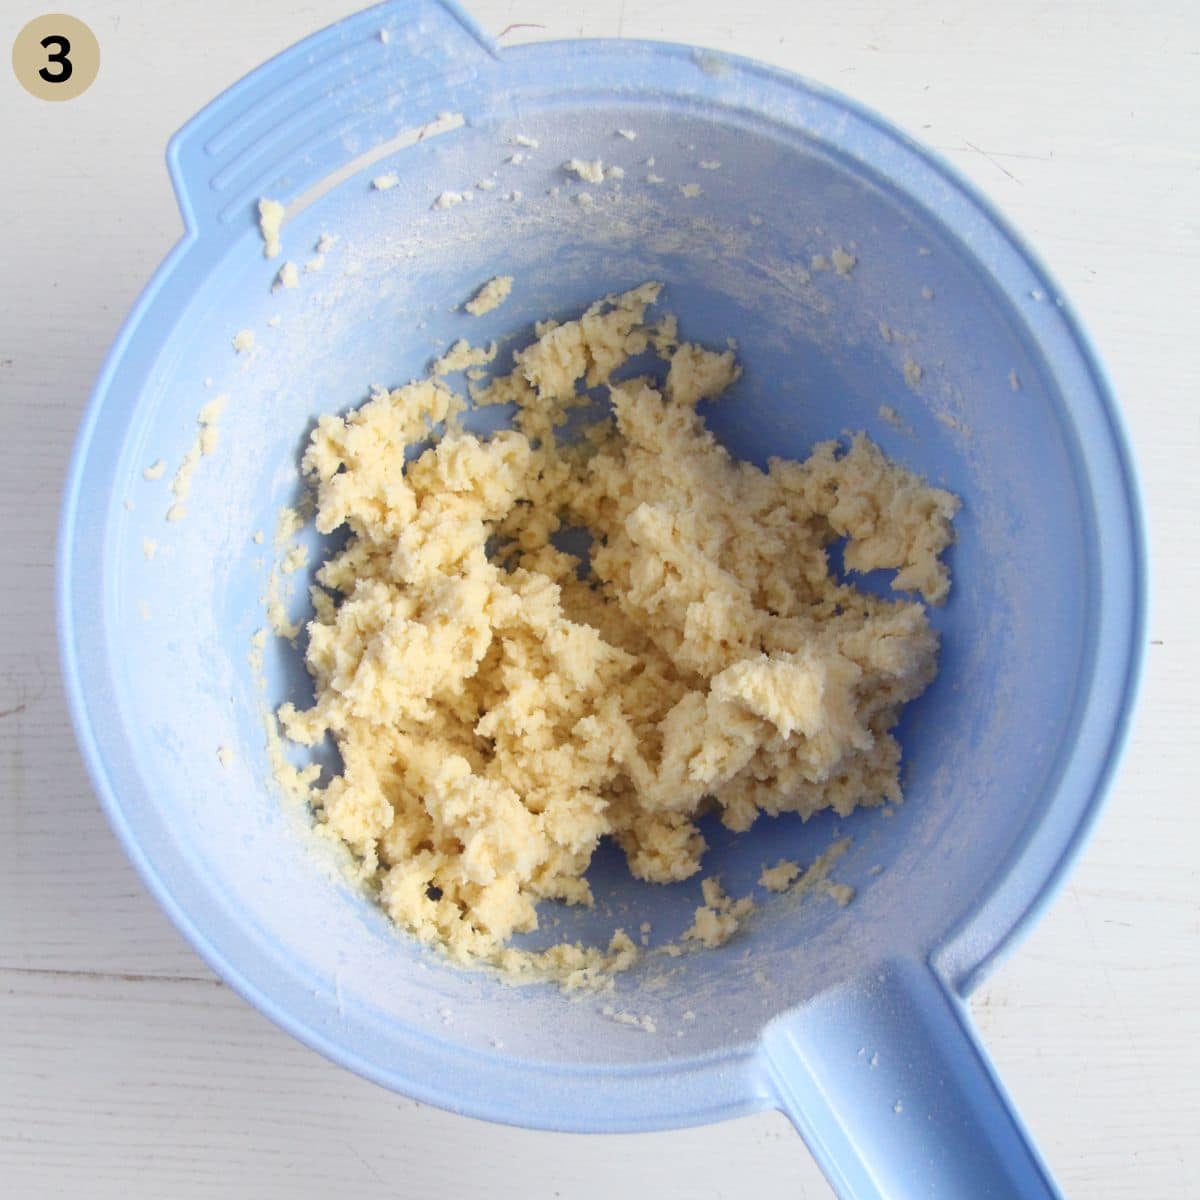 dough for making biscuits with sweetened condensed milk in a blue bowl.